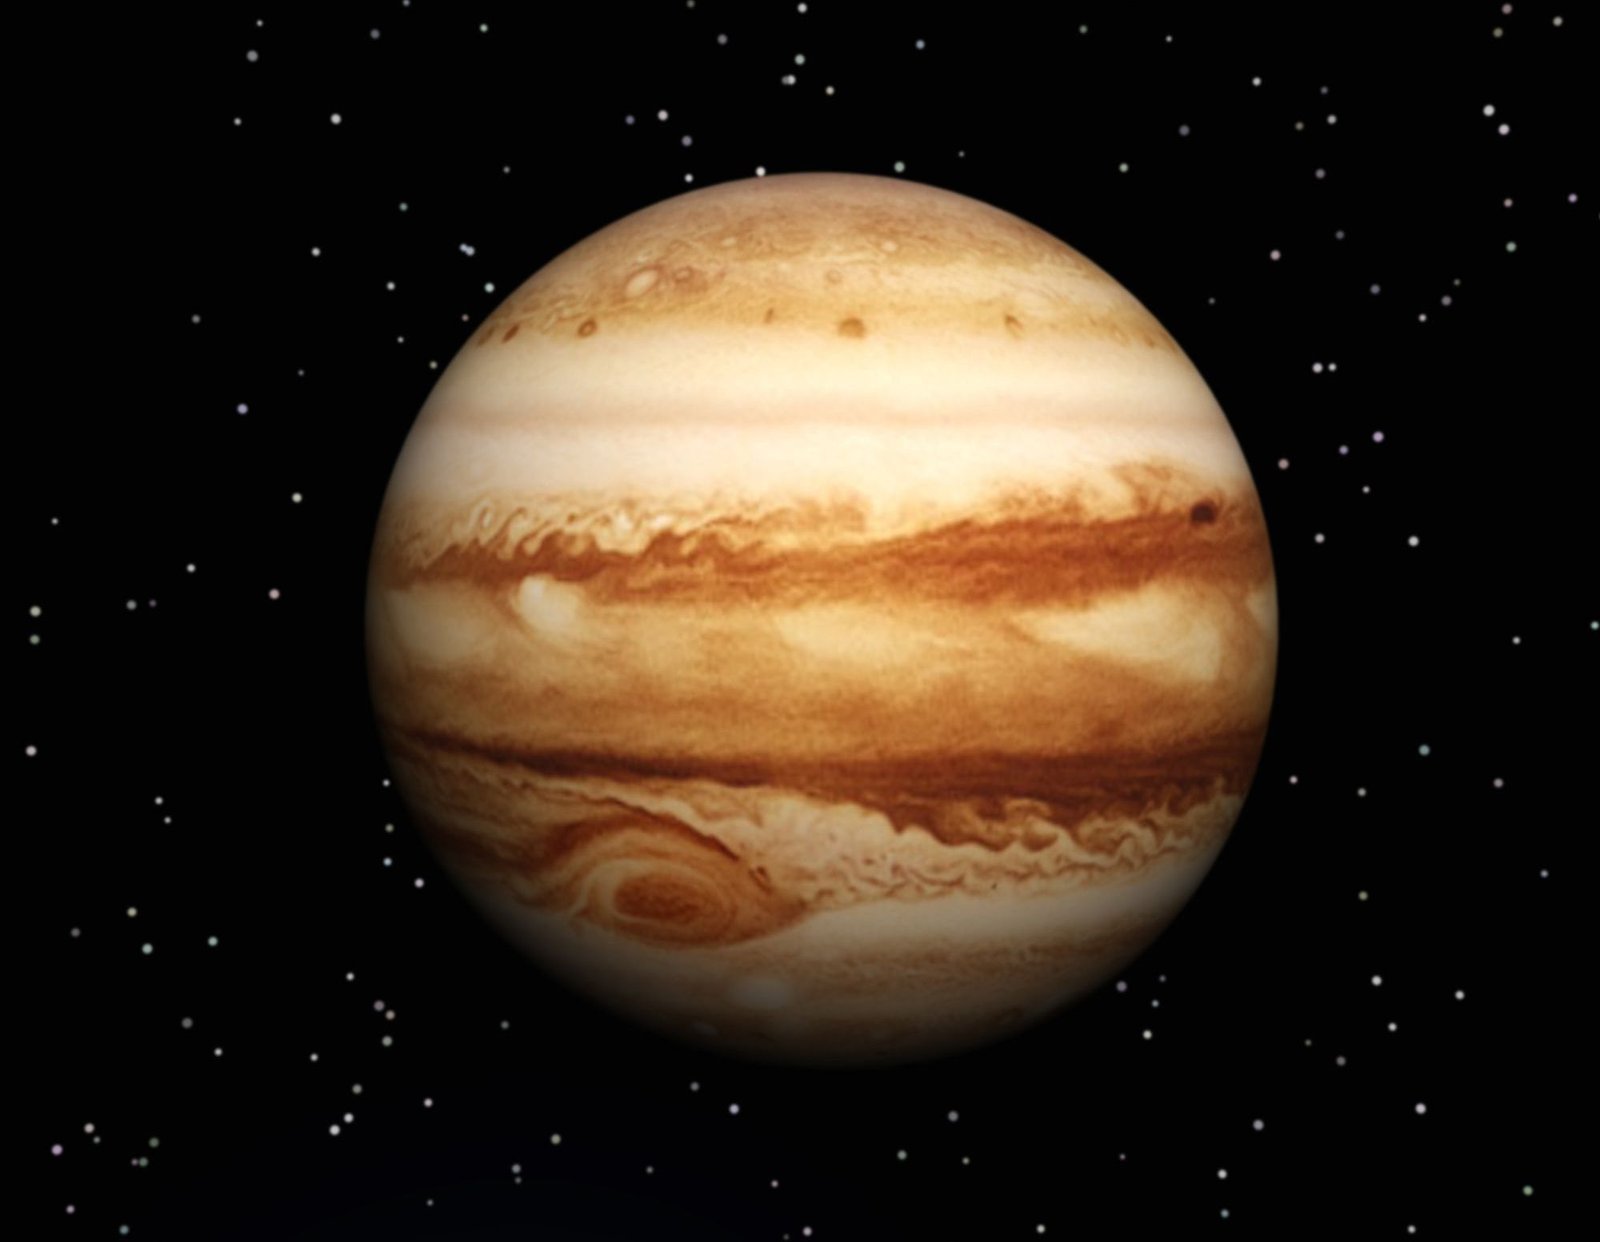 Jupiter is the largest planet in our Solar System